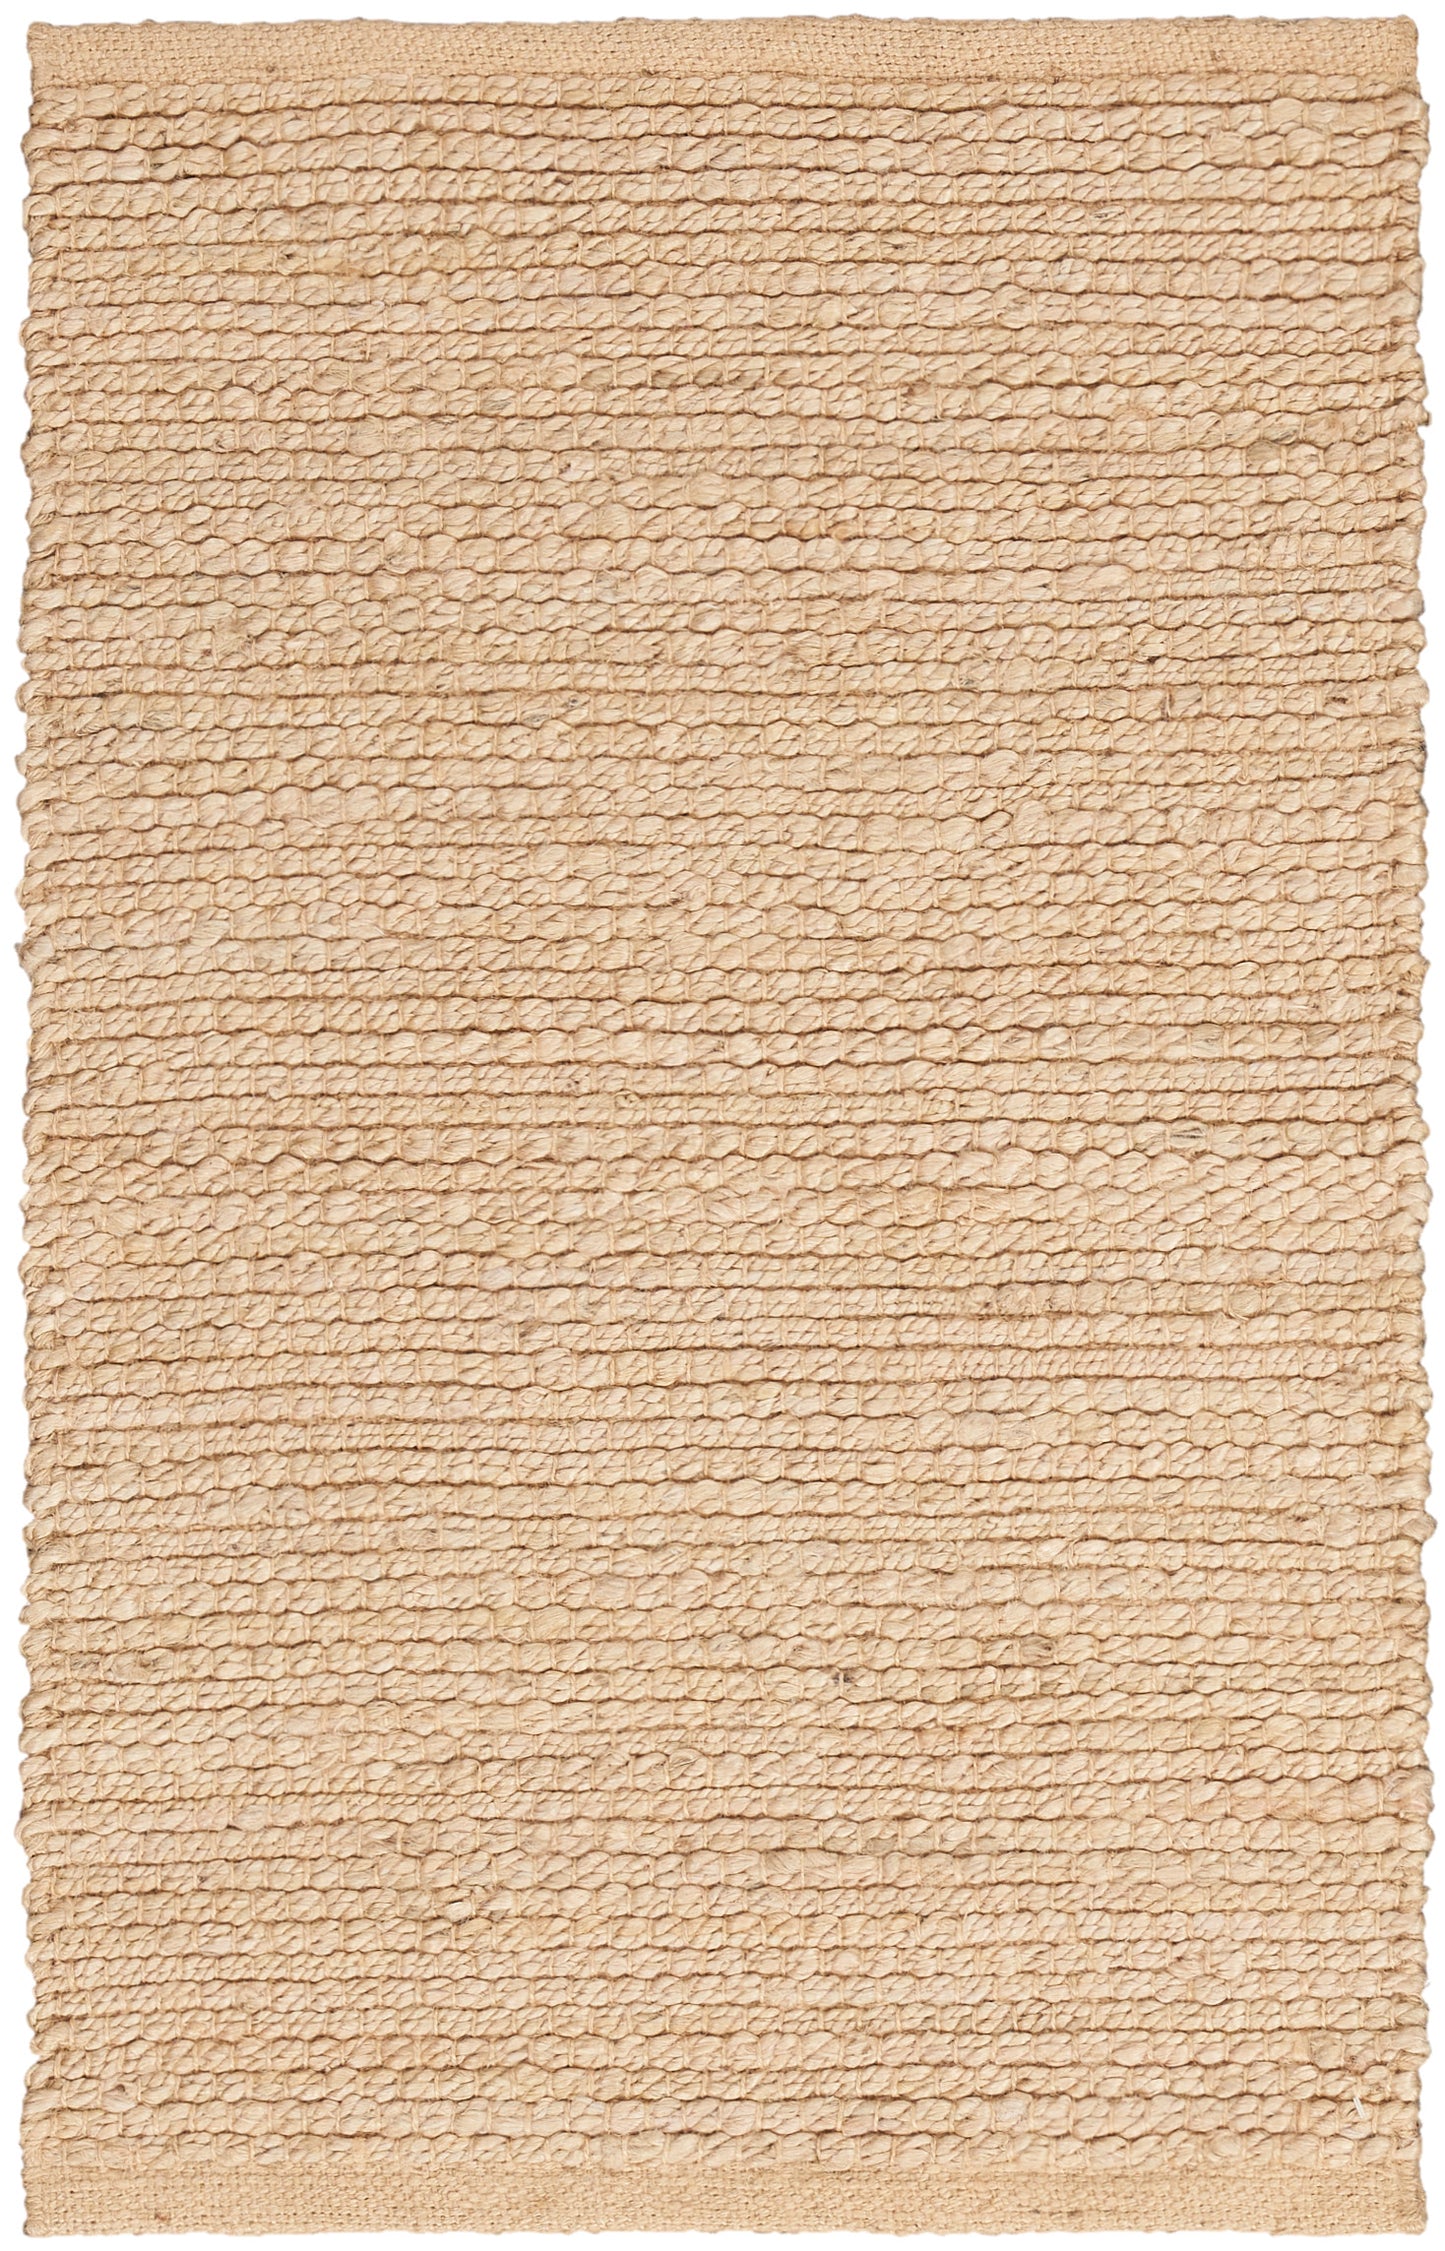 Nourison Home Natural Jute NJT01 Bleached Contemporary Woven Rug